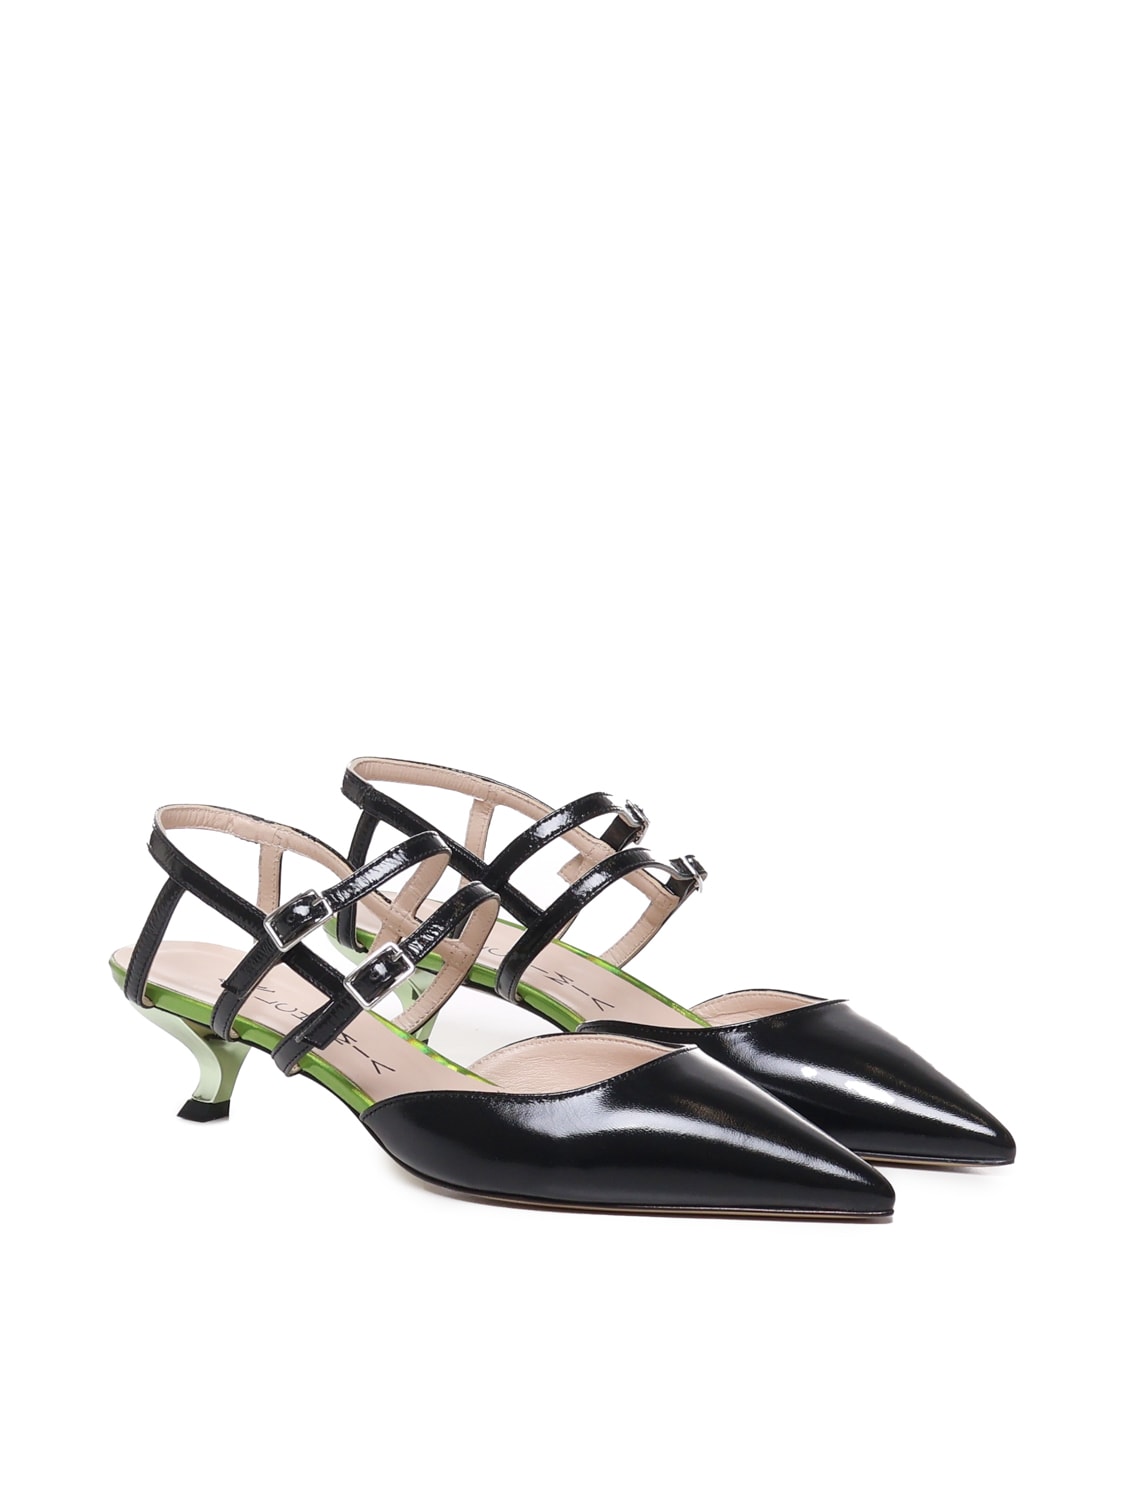 Shop Alchimia Shoes With Toes And Straps In Black, Green